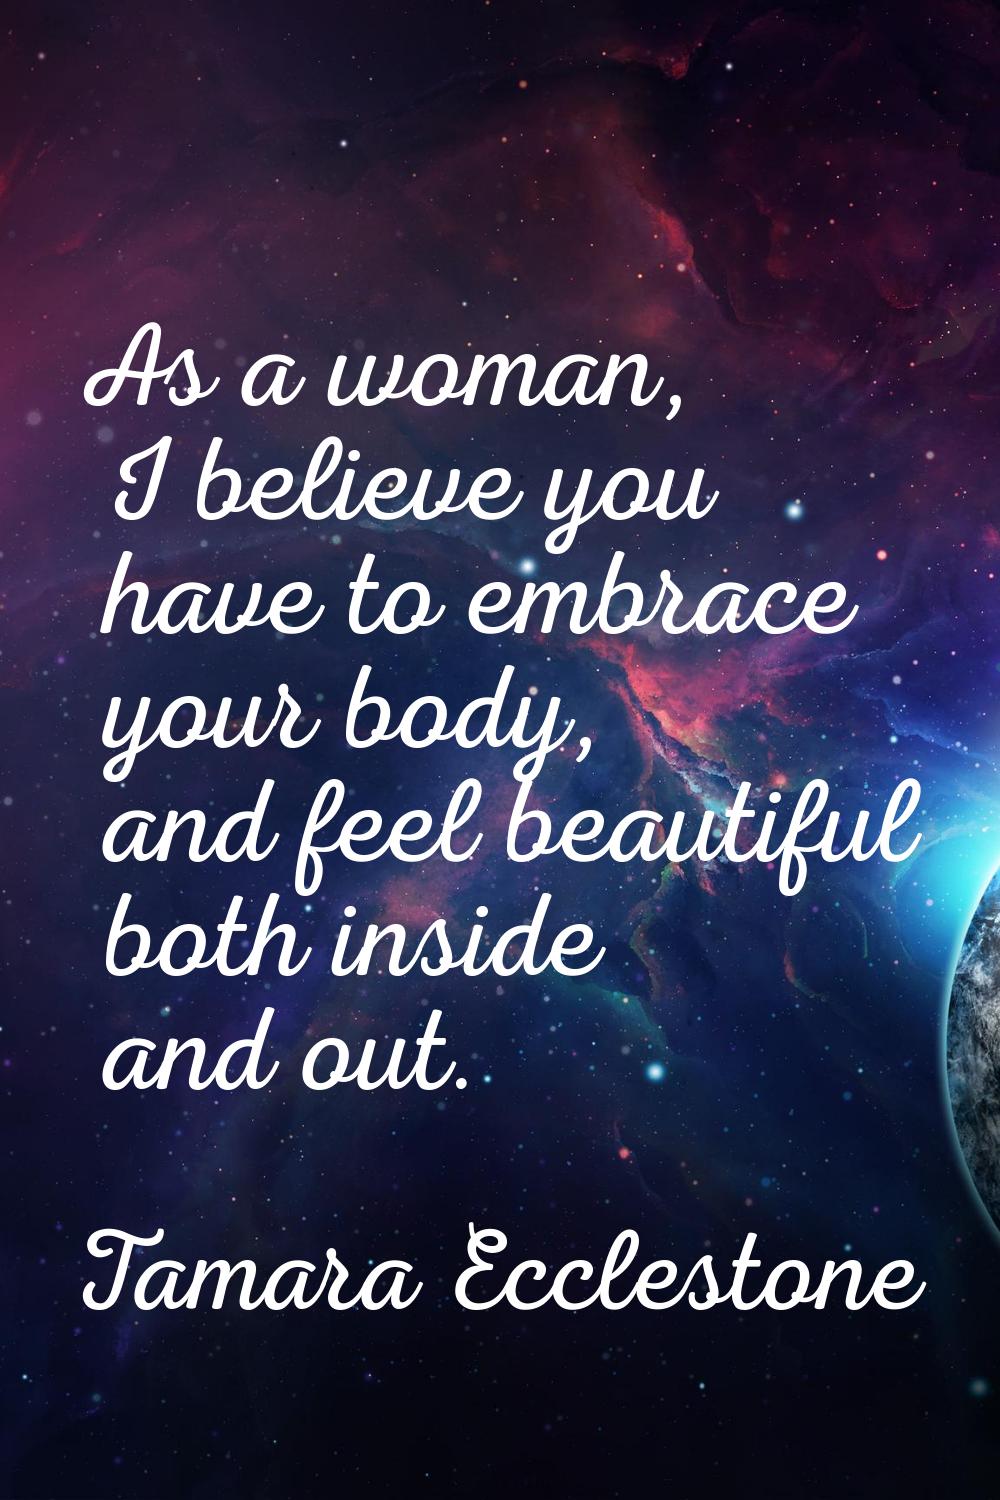 As a woman, I believe you have to embrace your body, and feel beautiful both inside and out.